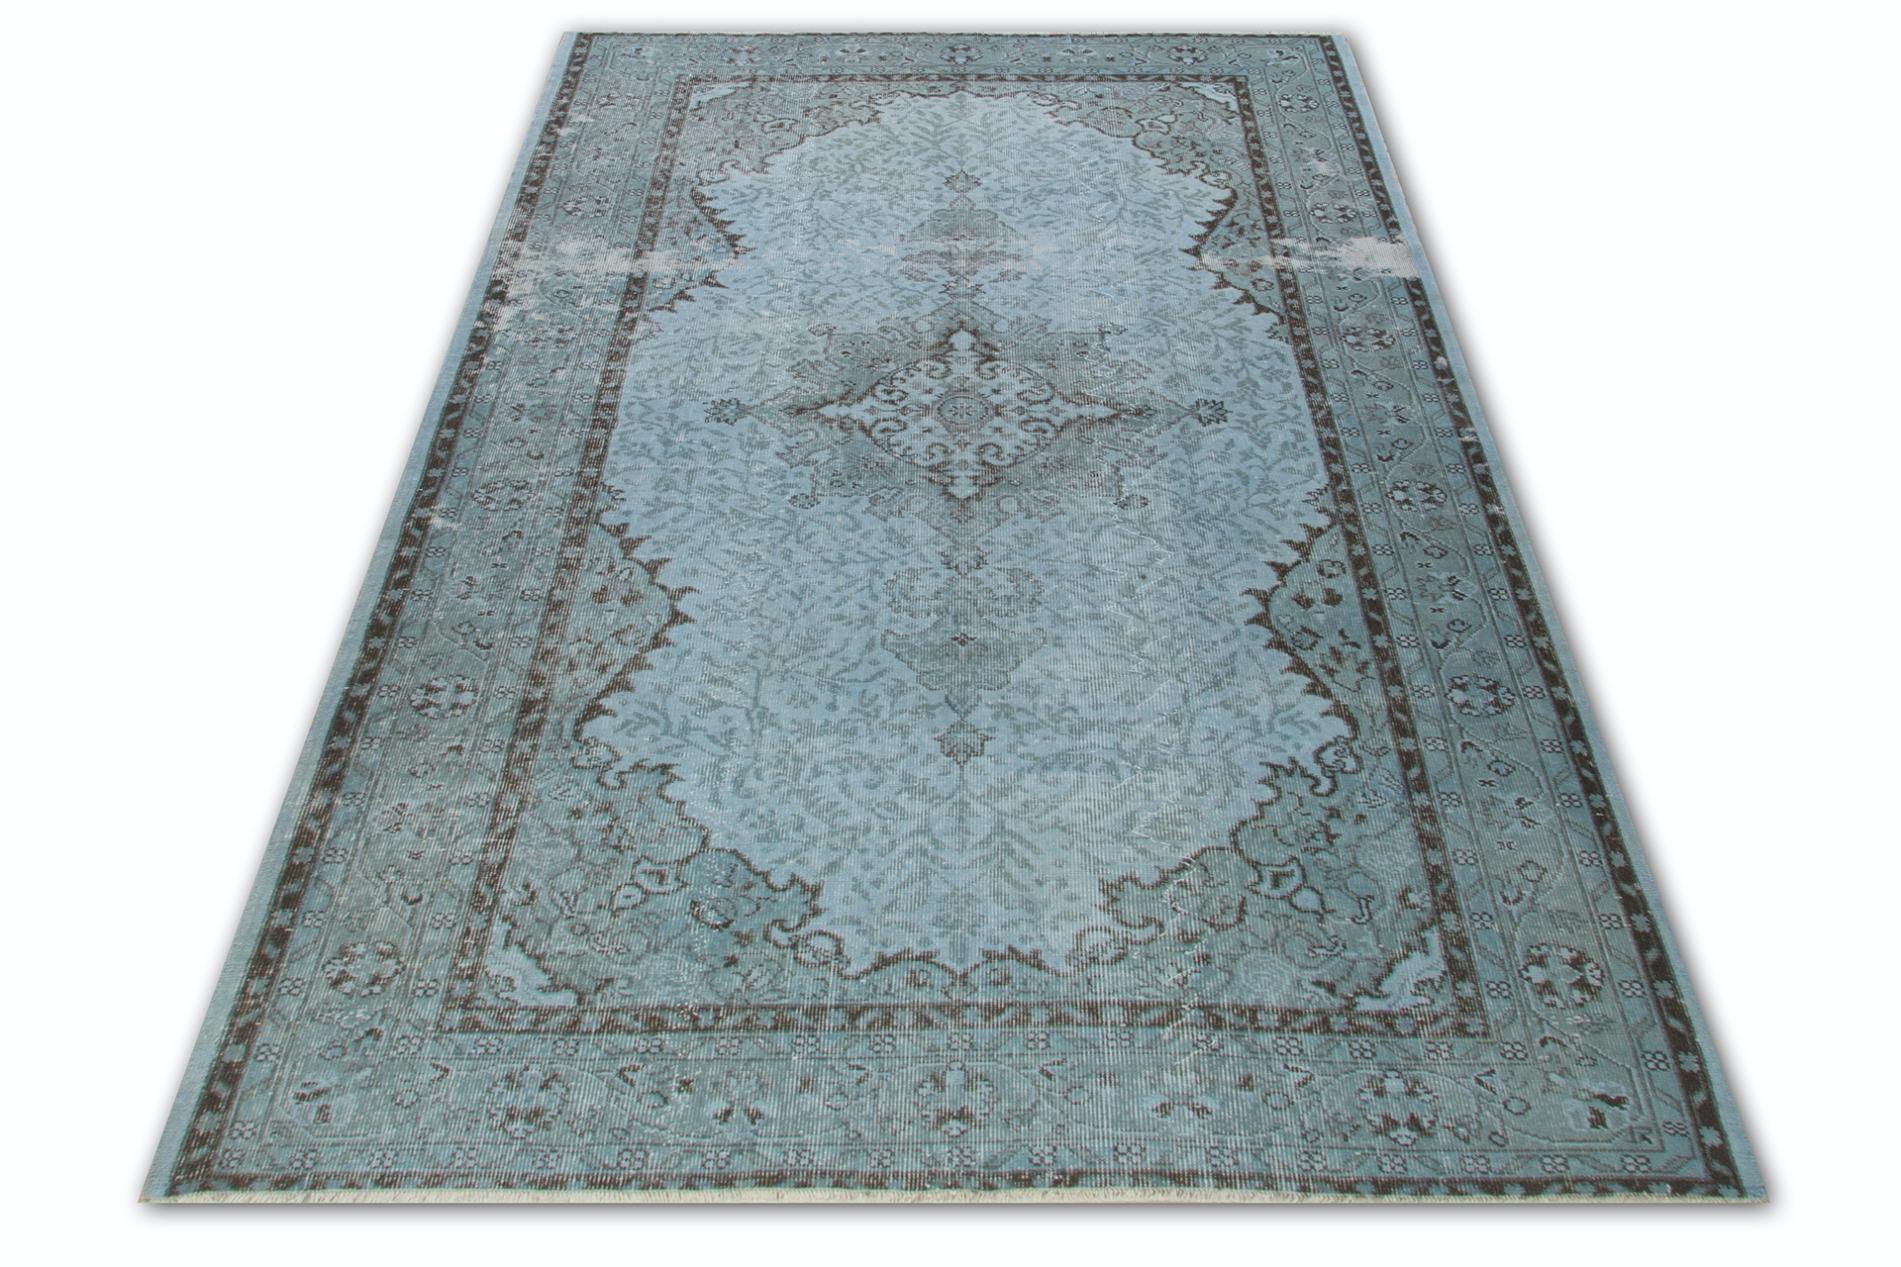 20th Century 5.7x9.3 Ft Hand-Knotted Vintage and Modern Area Rug Overdyed in Light Blue Color